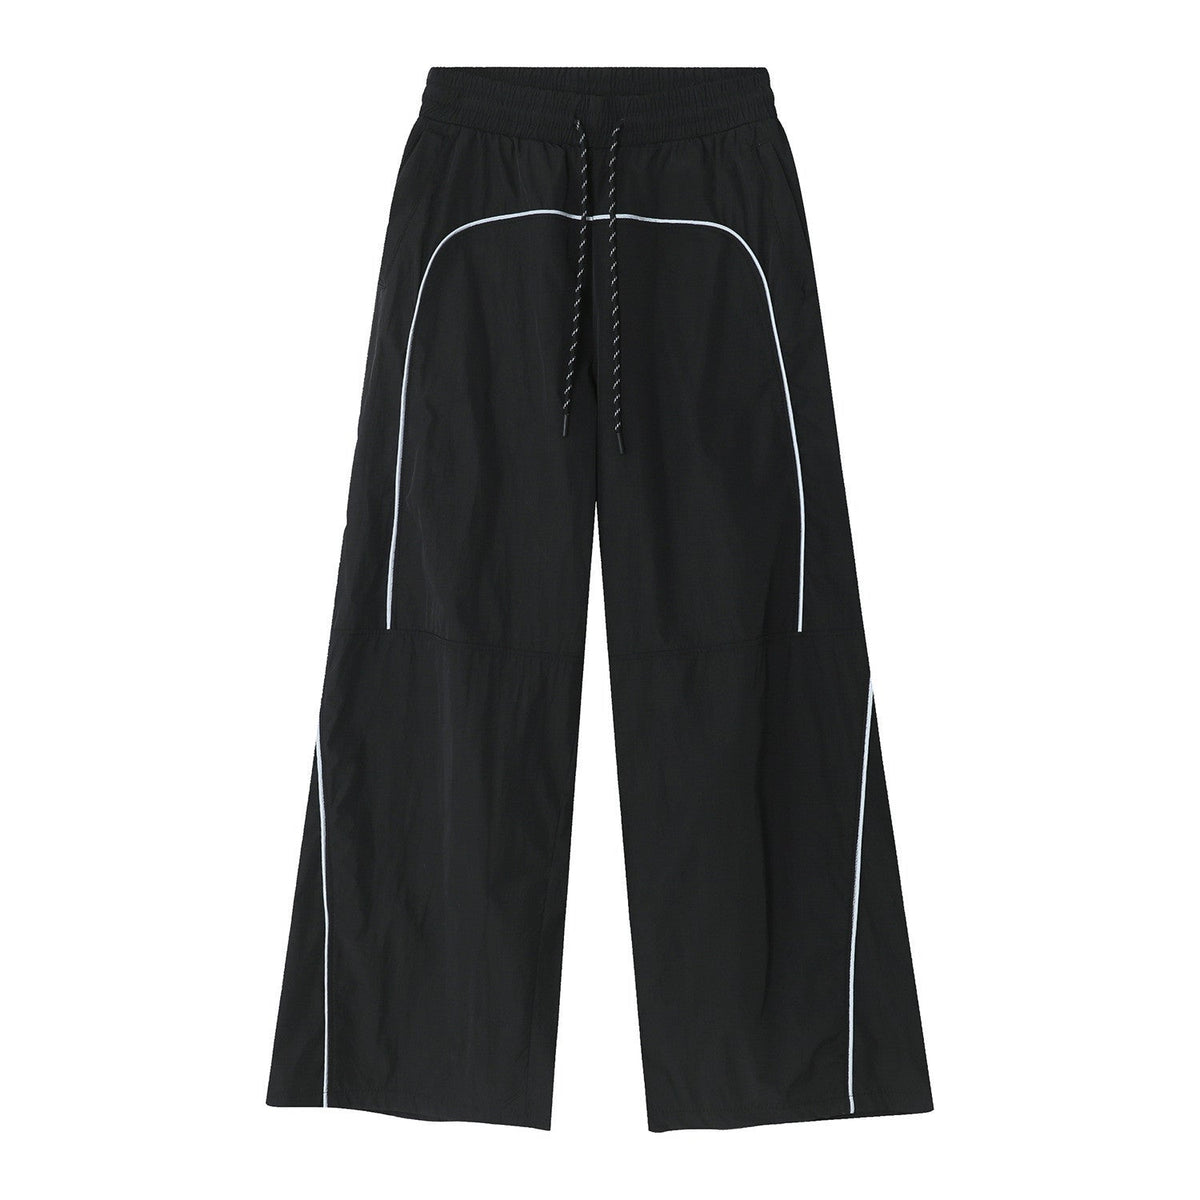 Contrast Piping Baggy Sweatpants